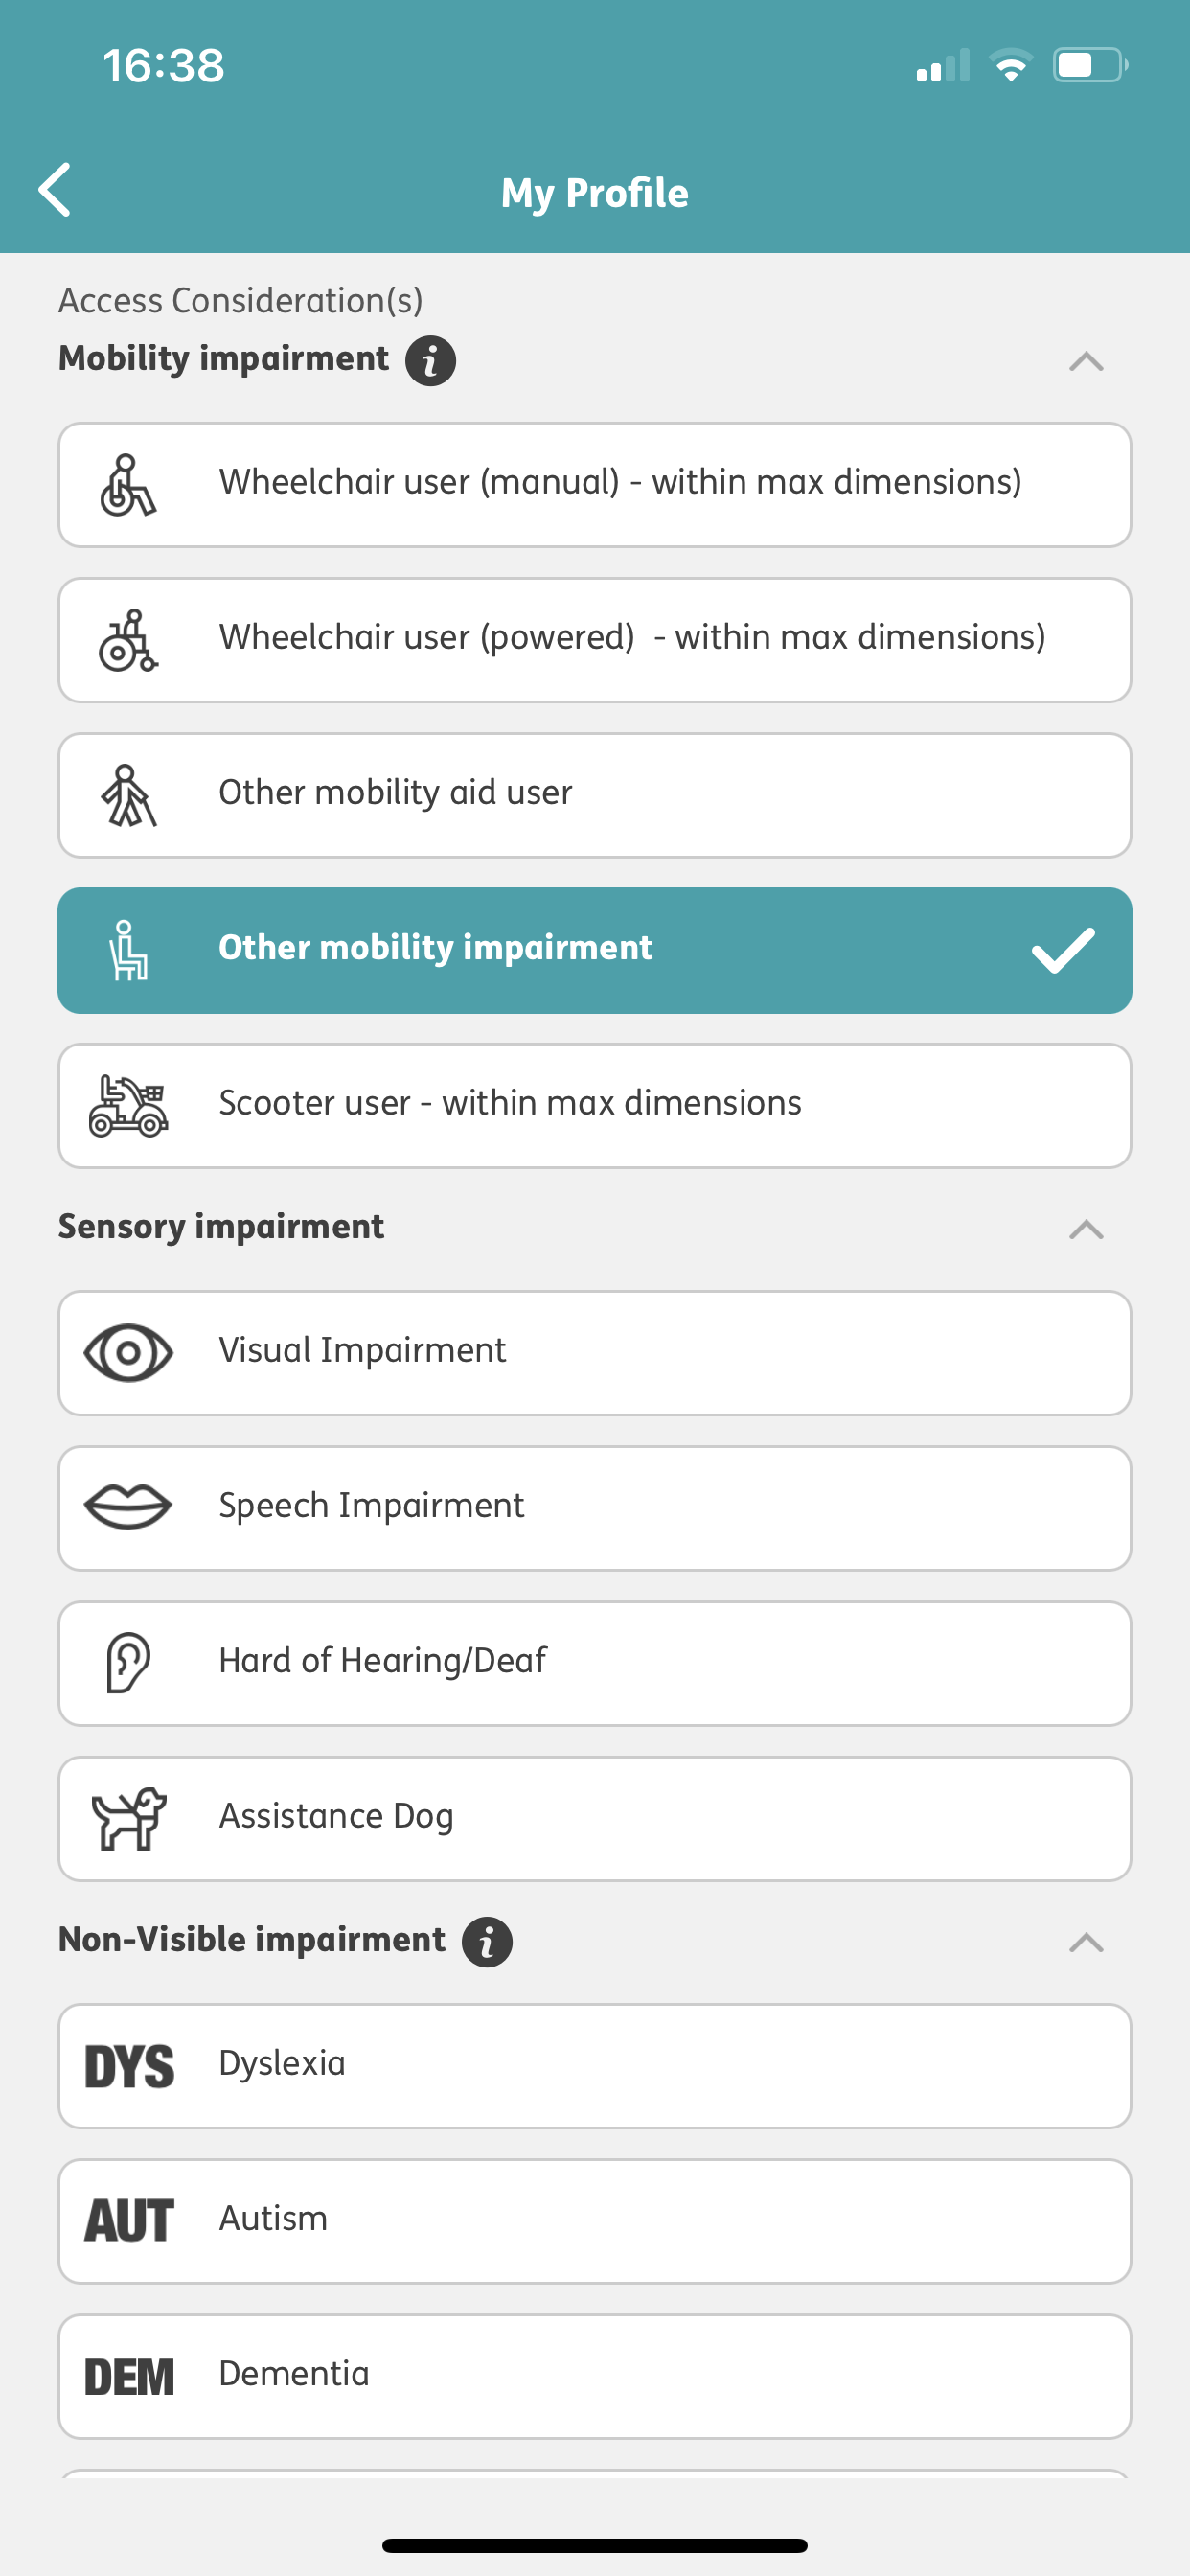 Screenshot of the Passenger Assistance app giving you a choice of access considerations including, wheelchair user (manual), wheelchair user (powered), other mobility aid user, other mobility impairment, scooter user. Sensory impairments including visual impairment, speech impairment, hard of hearing/death, assistance dog.